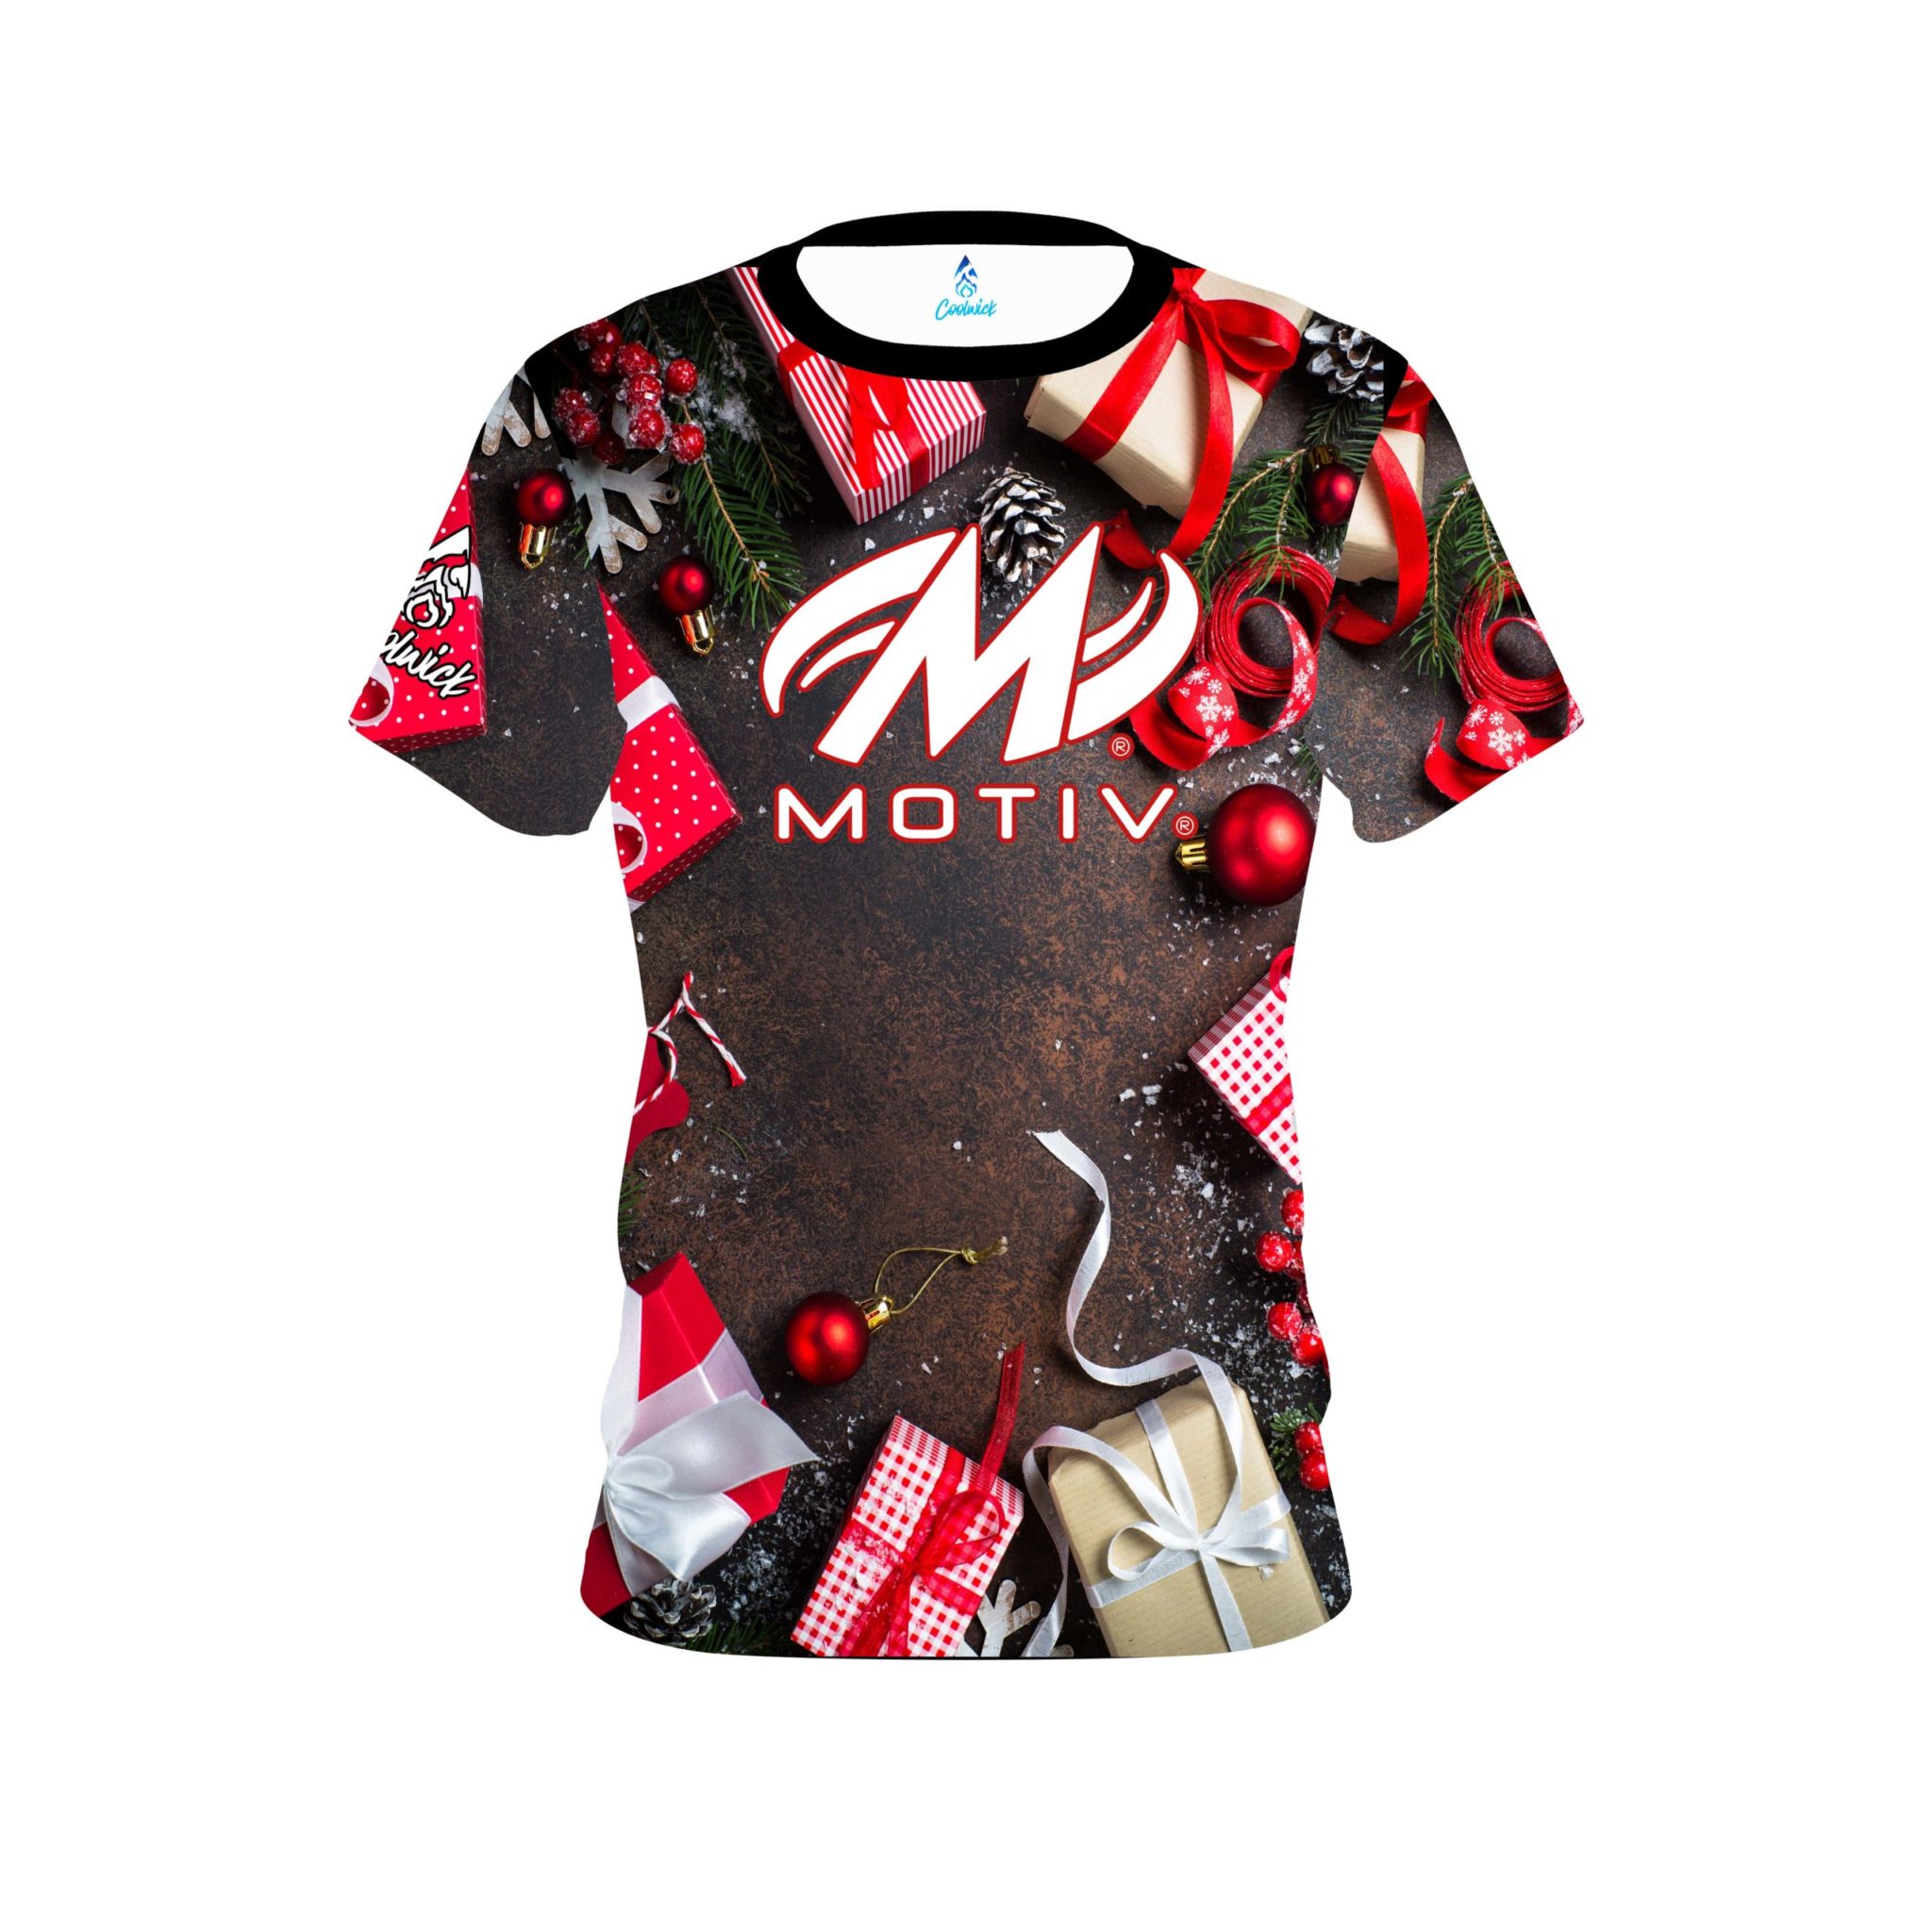 Motiv Holiday Gift Exchange Coolwick Bowling Jersey